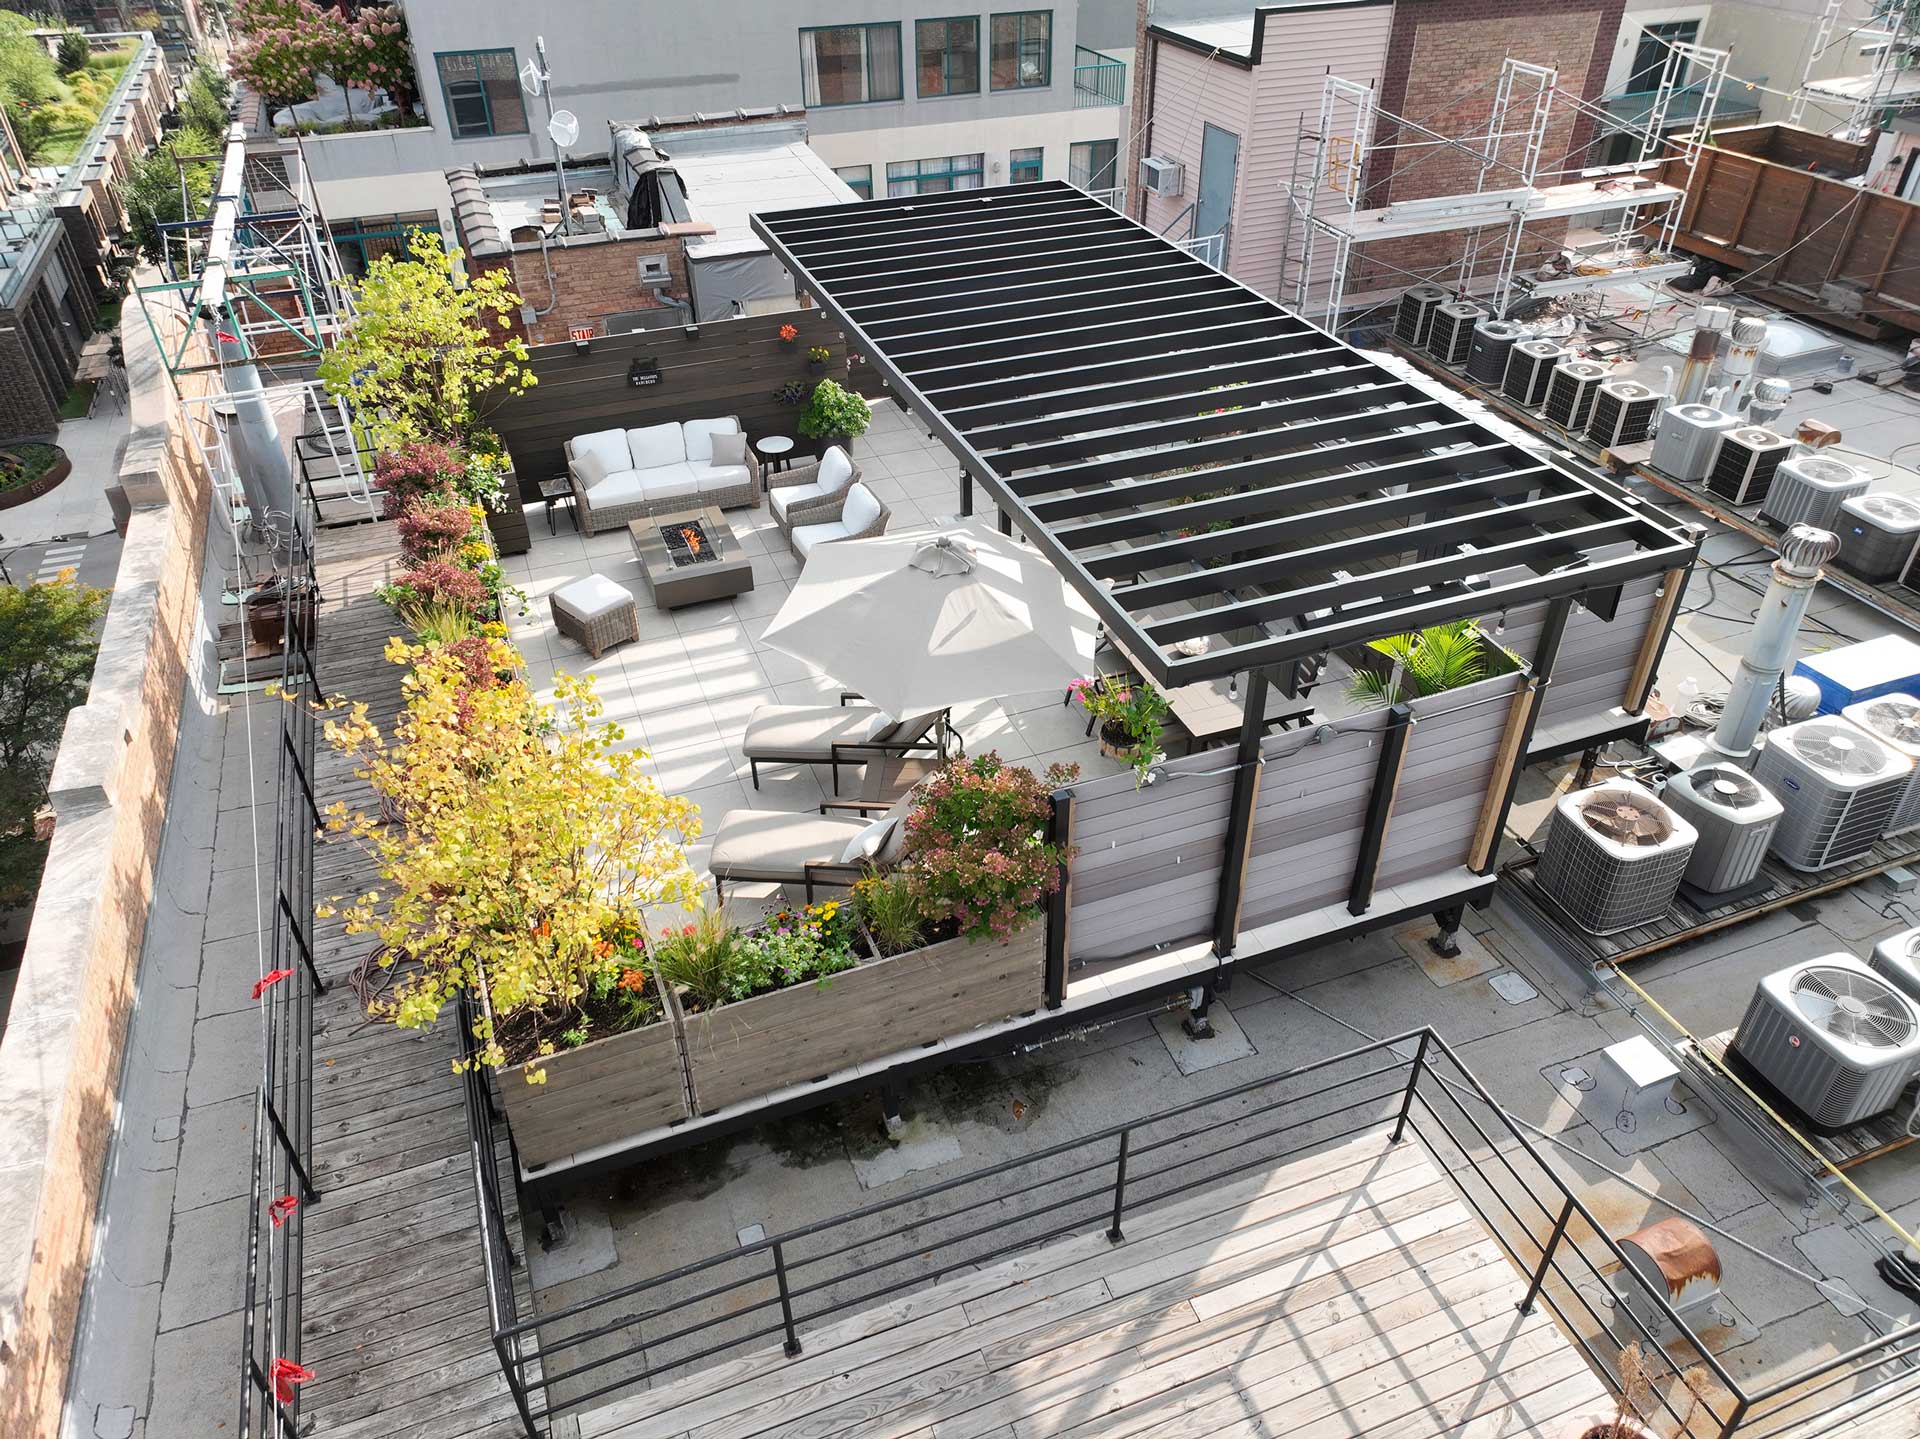 Aerial view of a spacious rooftop deck with a steel pergola, outdoor furniture, and lush planters